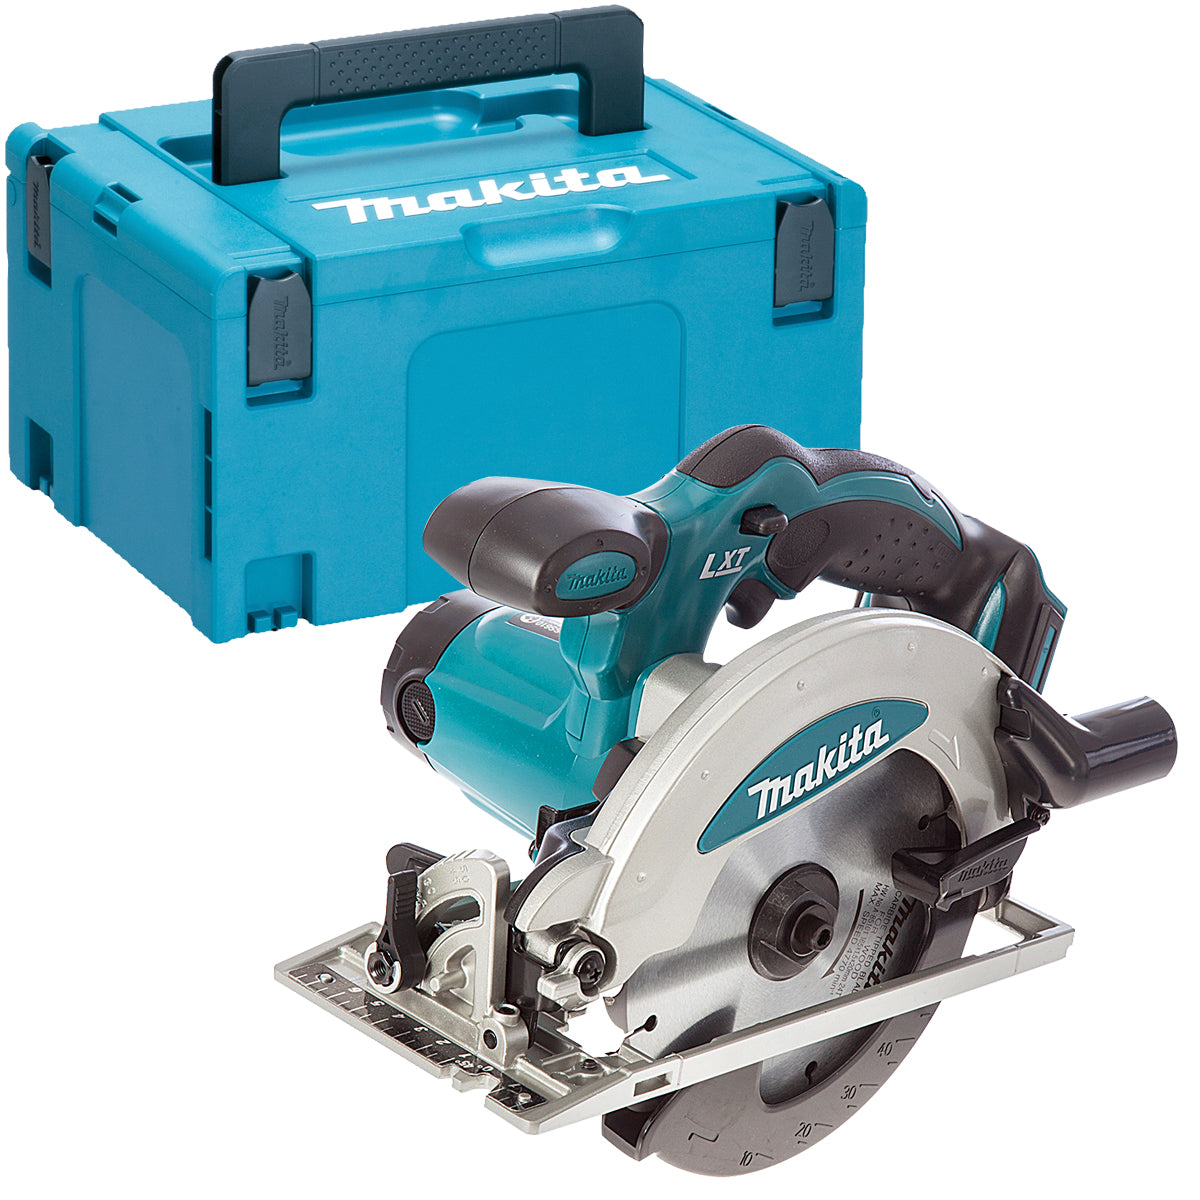 Makita DSS610Z 18V LXT 165mm Circular Saw with Makpac Type 3 Case